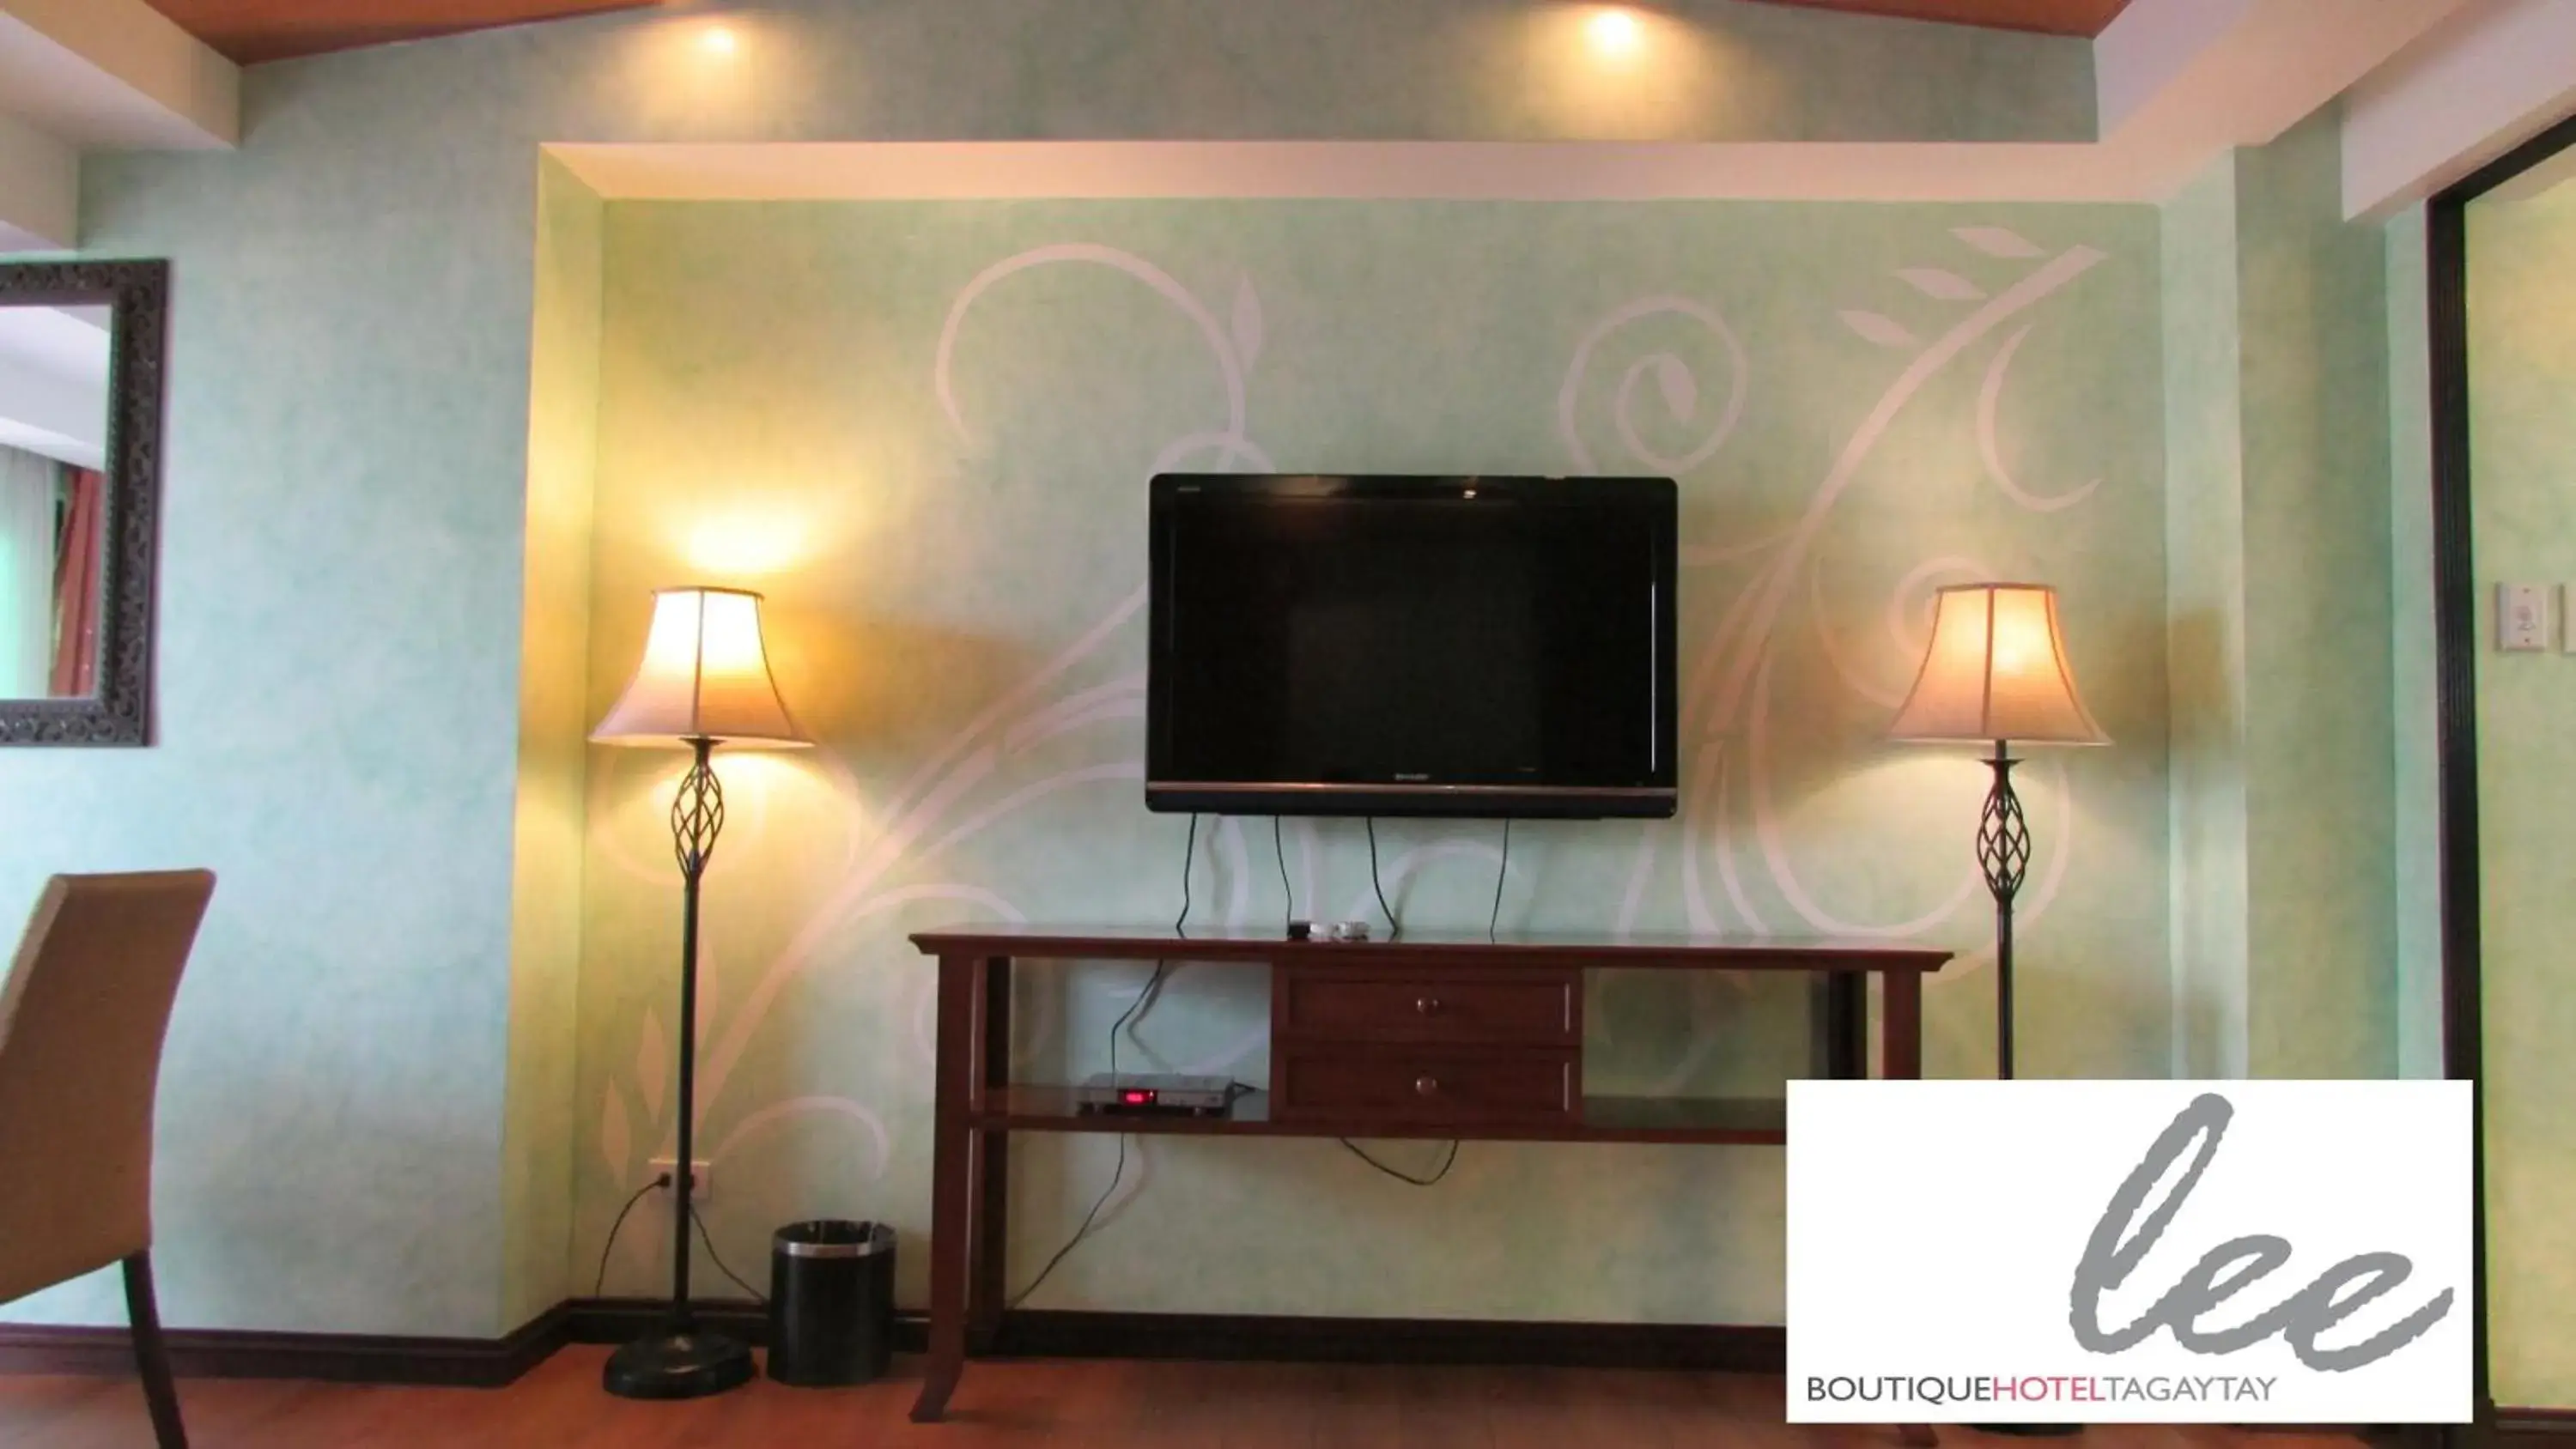 Living room, TV/Entertainment Center in Lee Boutique Hotel Tagaytay